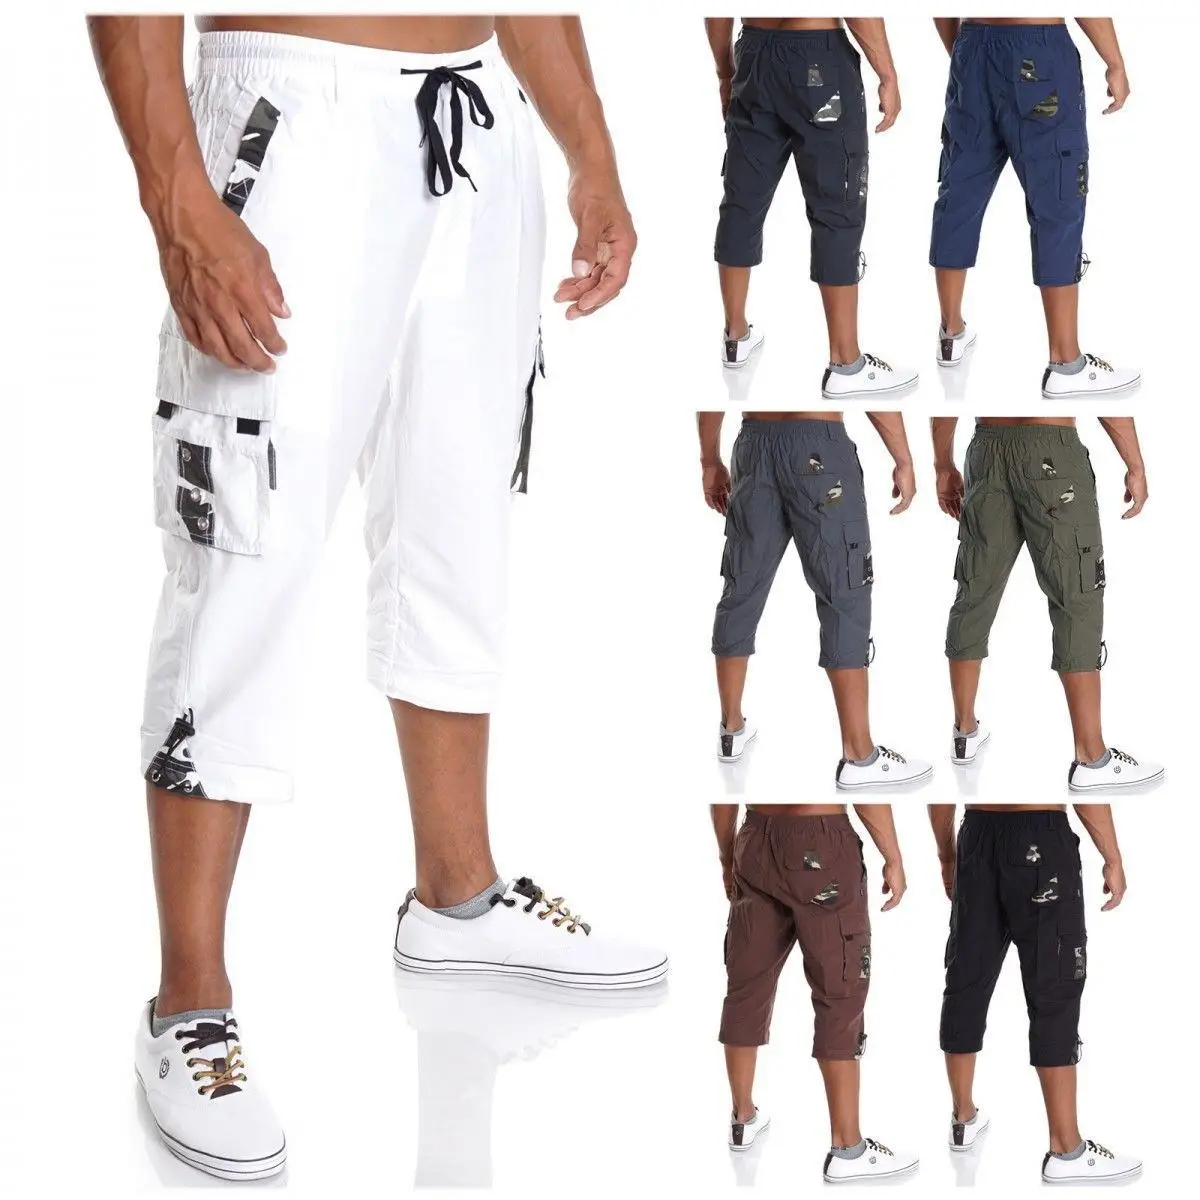 

ZOGAA 2021 New Men's Casual Pants Cropped Trousers Casual Style Loose Men's Bottoms Sports Pants Suitable For Outdoor Sports